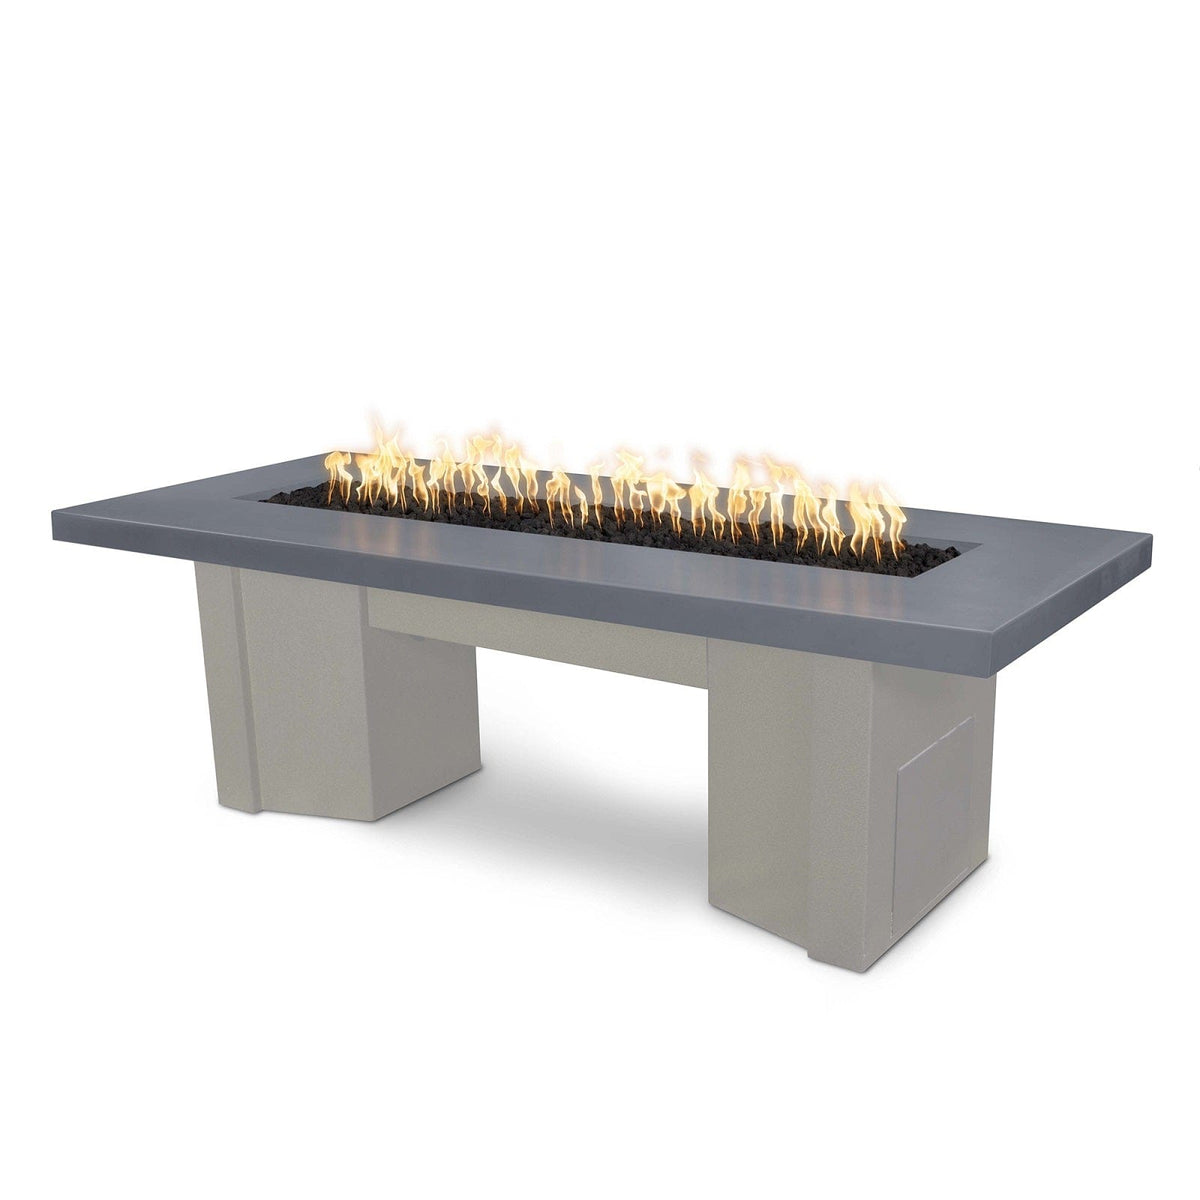 The Outdoor Plus Fire Features Gray (-GRY) / Pewter Powder Coated Steel (-PEW) The Outdoor Plus 60&quot; Alameda Fire Table Smooth Concrete in Liquid Propane - Match Lit with Flame Sense System / OPT-ALMGFRC60FSML-LP